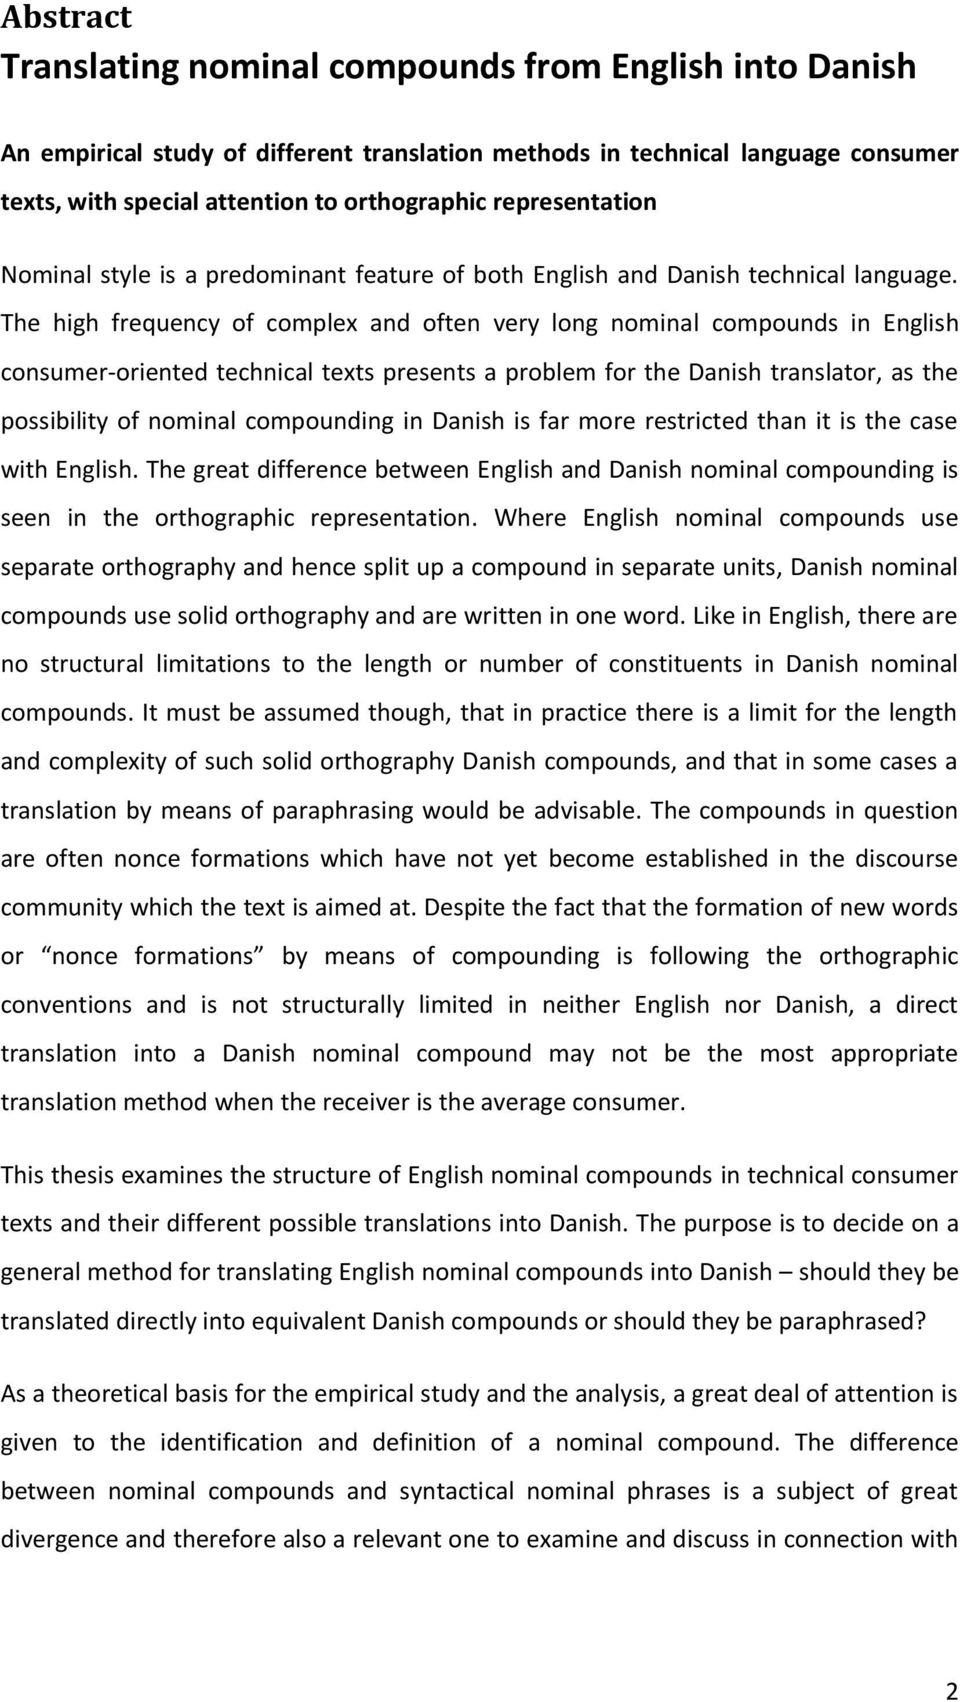 The high frequency of complex and often very long nominal compounds in English consumer-oriented technical texts presents a problem for the Danish translator, as the possibility of nominal